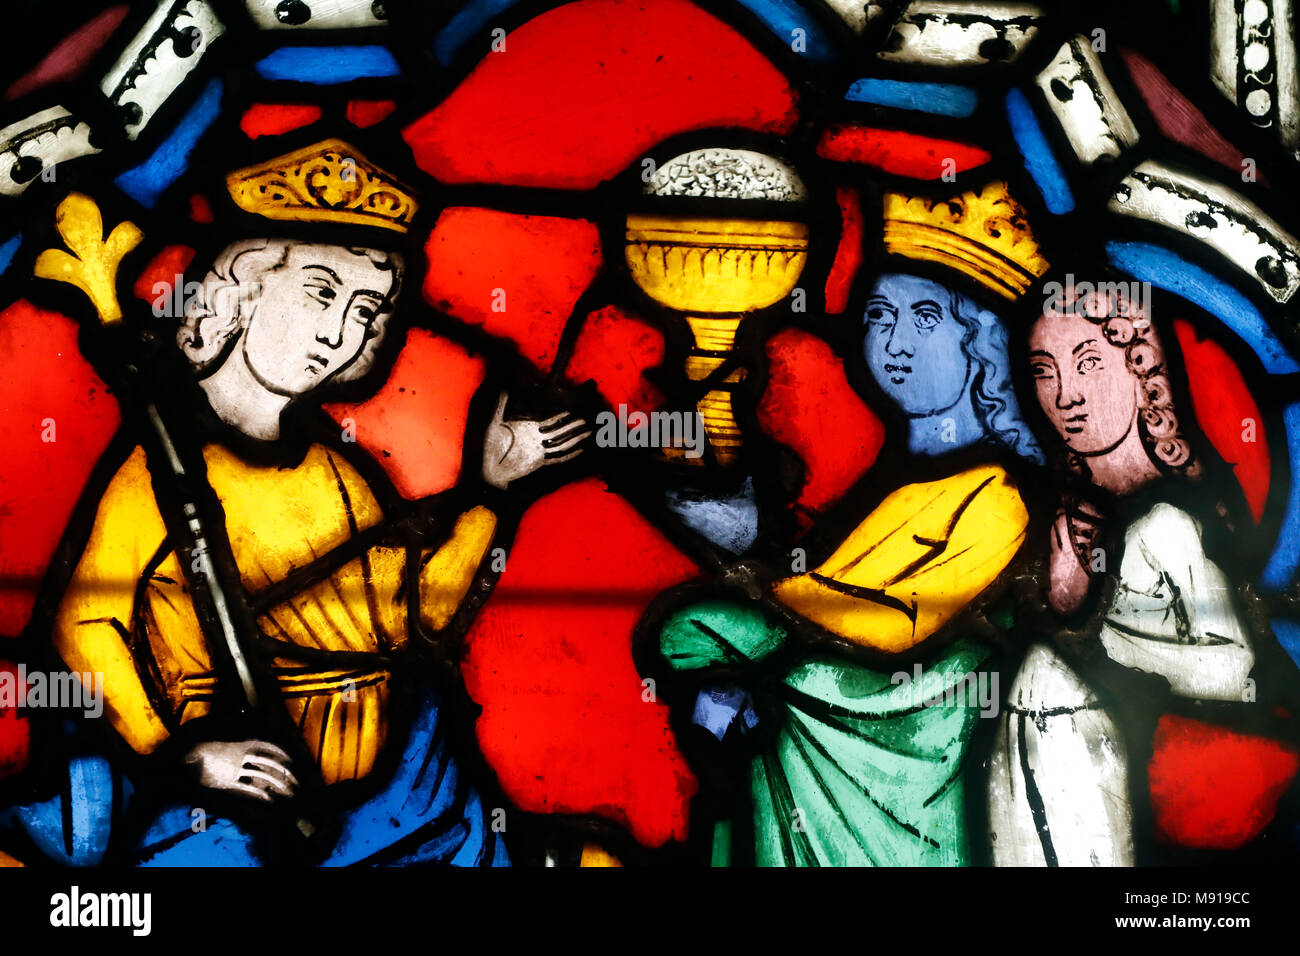 Oeuvre Notre-Dame Museum.  Stained glass window. Solomon and the Queen of Sheba.  St Thomas church. 13 th century.  Strasbourg. France. Stock Photo